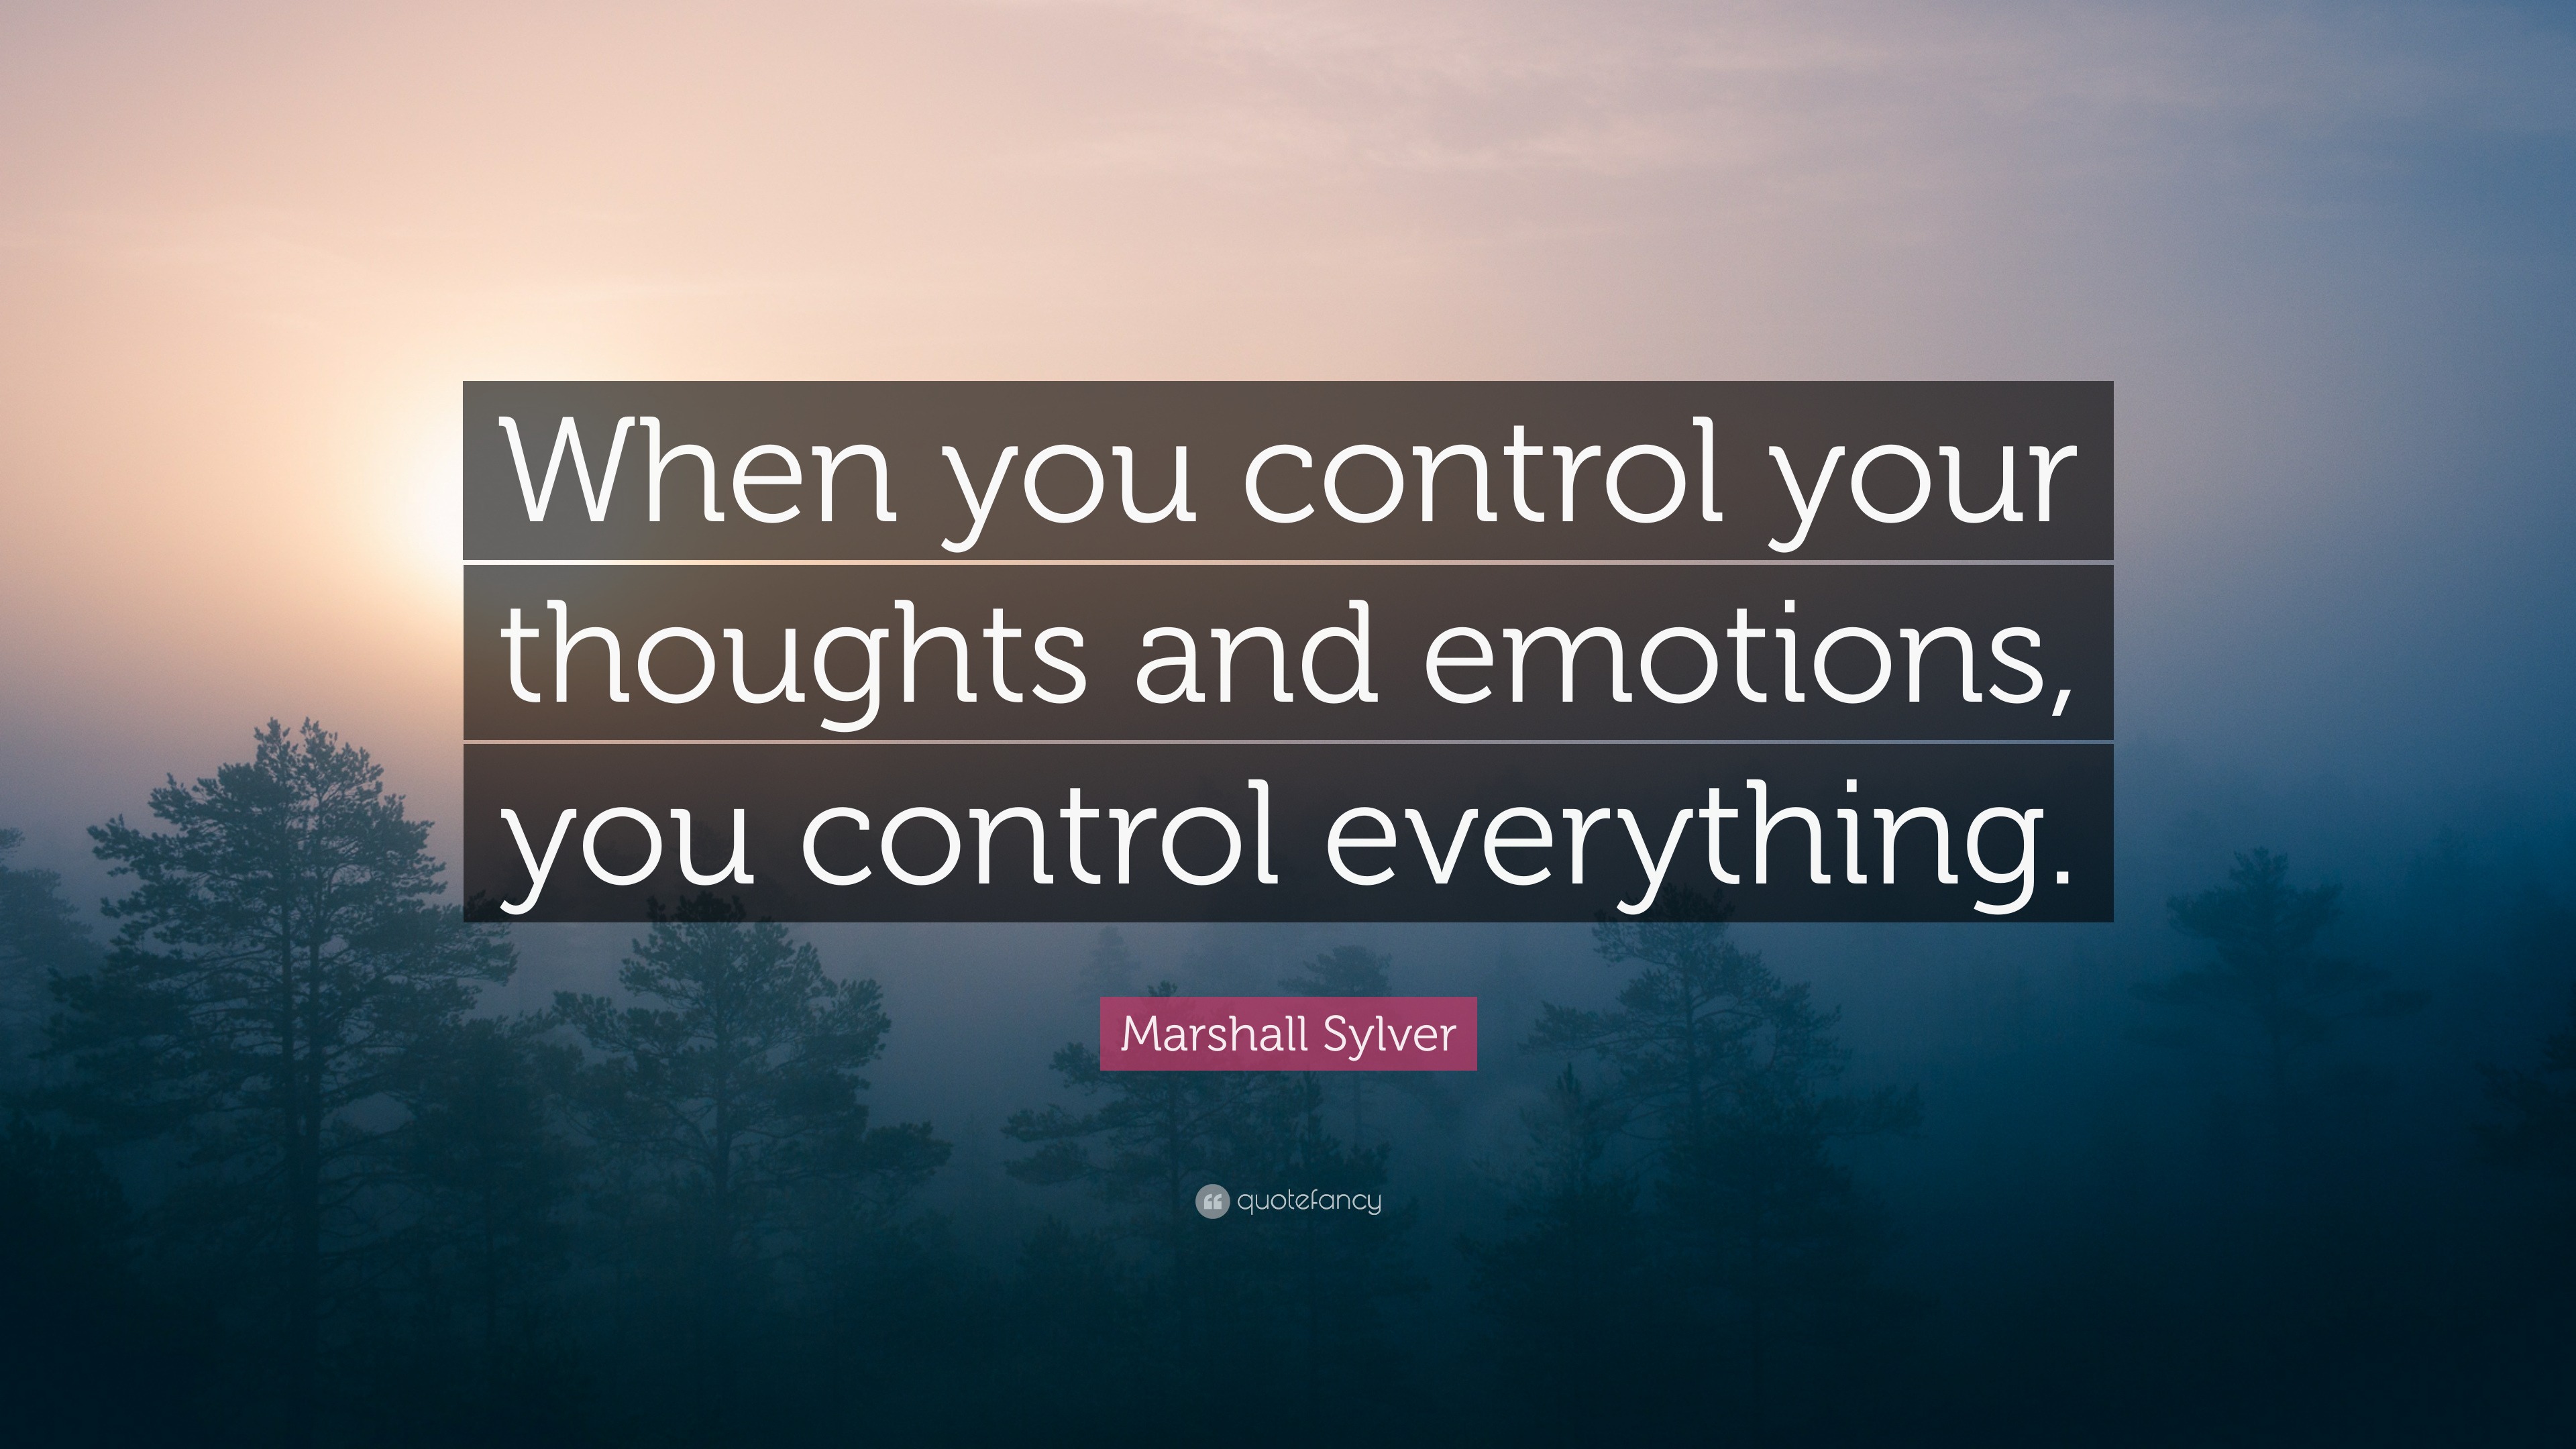 Marshall Sylver Quote “When you control your thoughts and